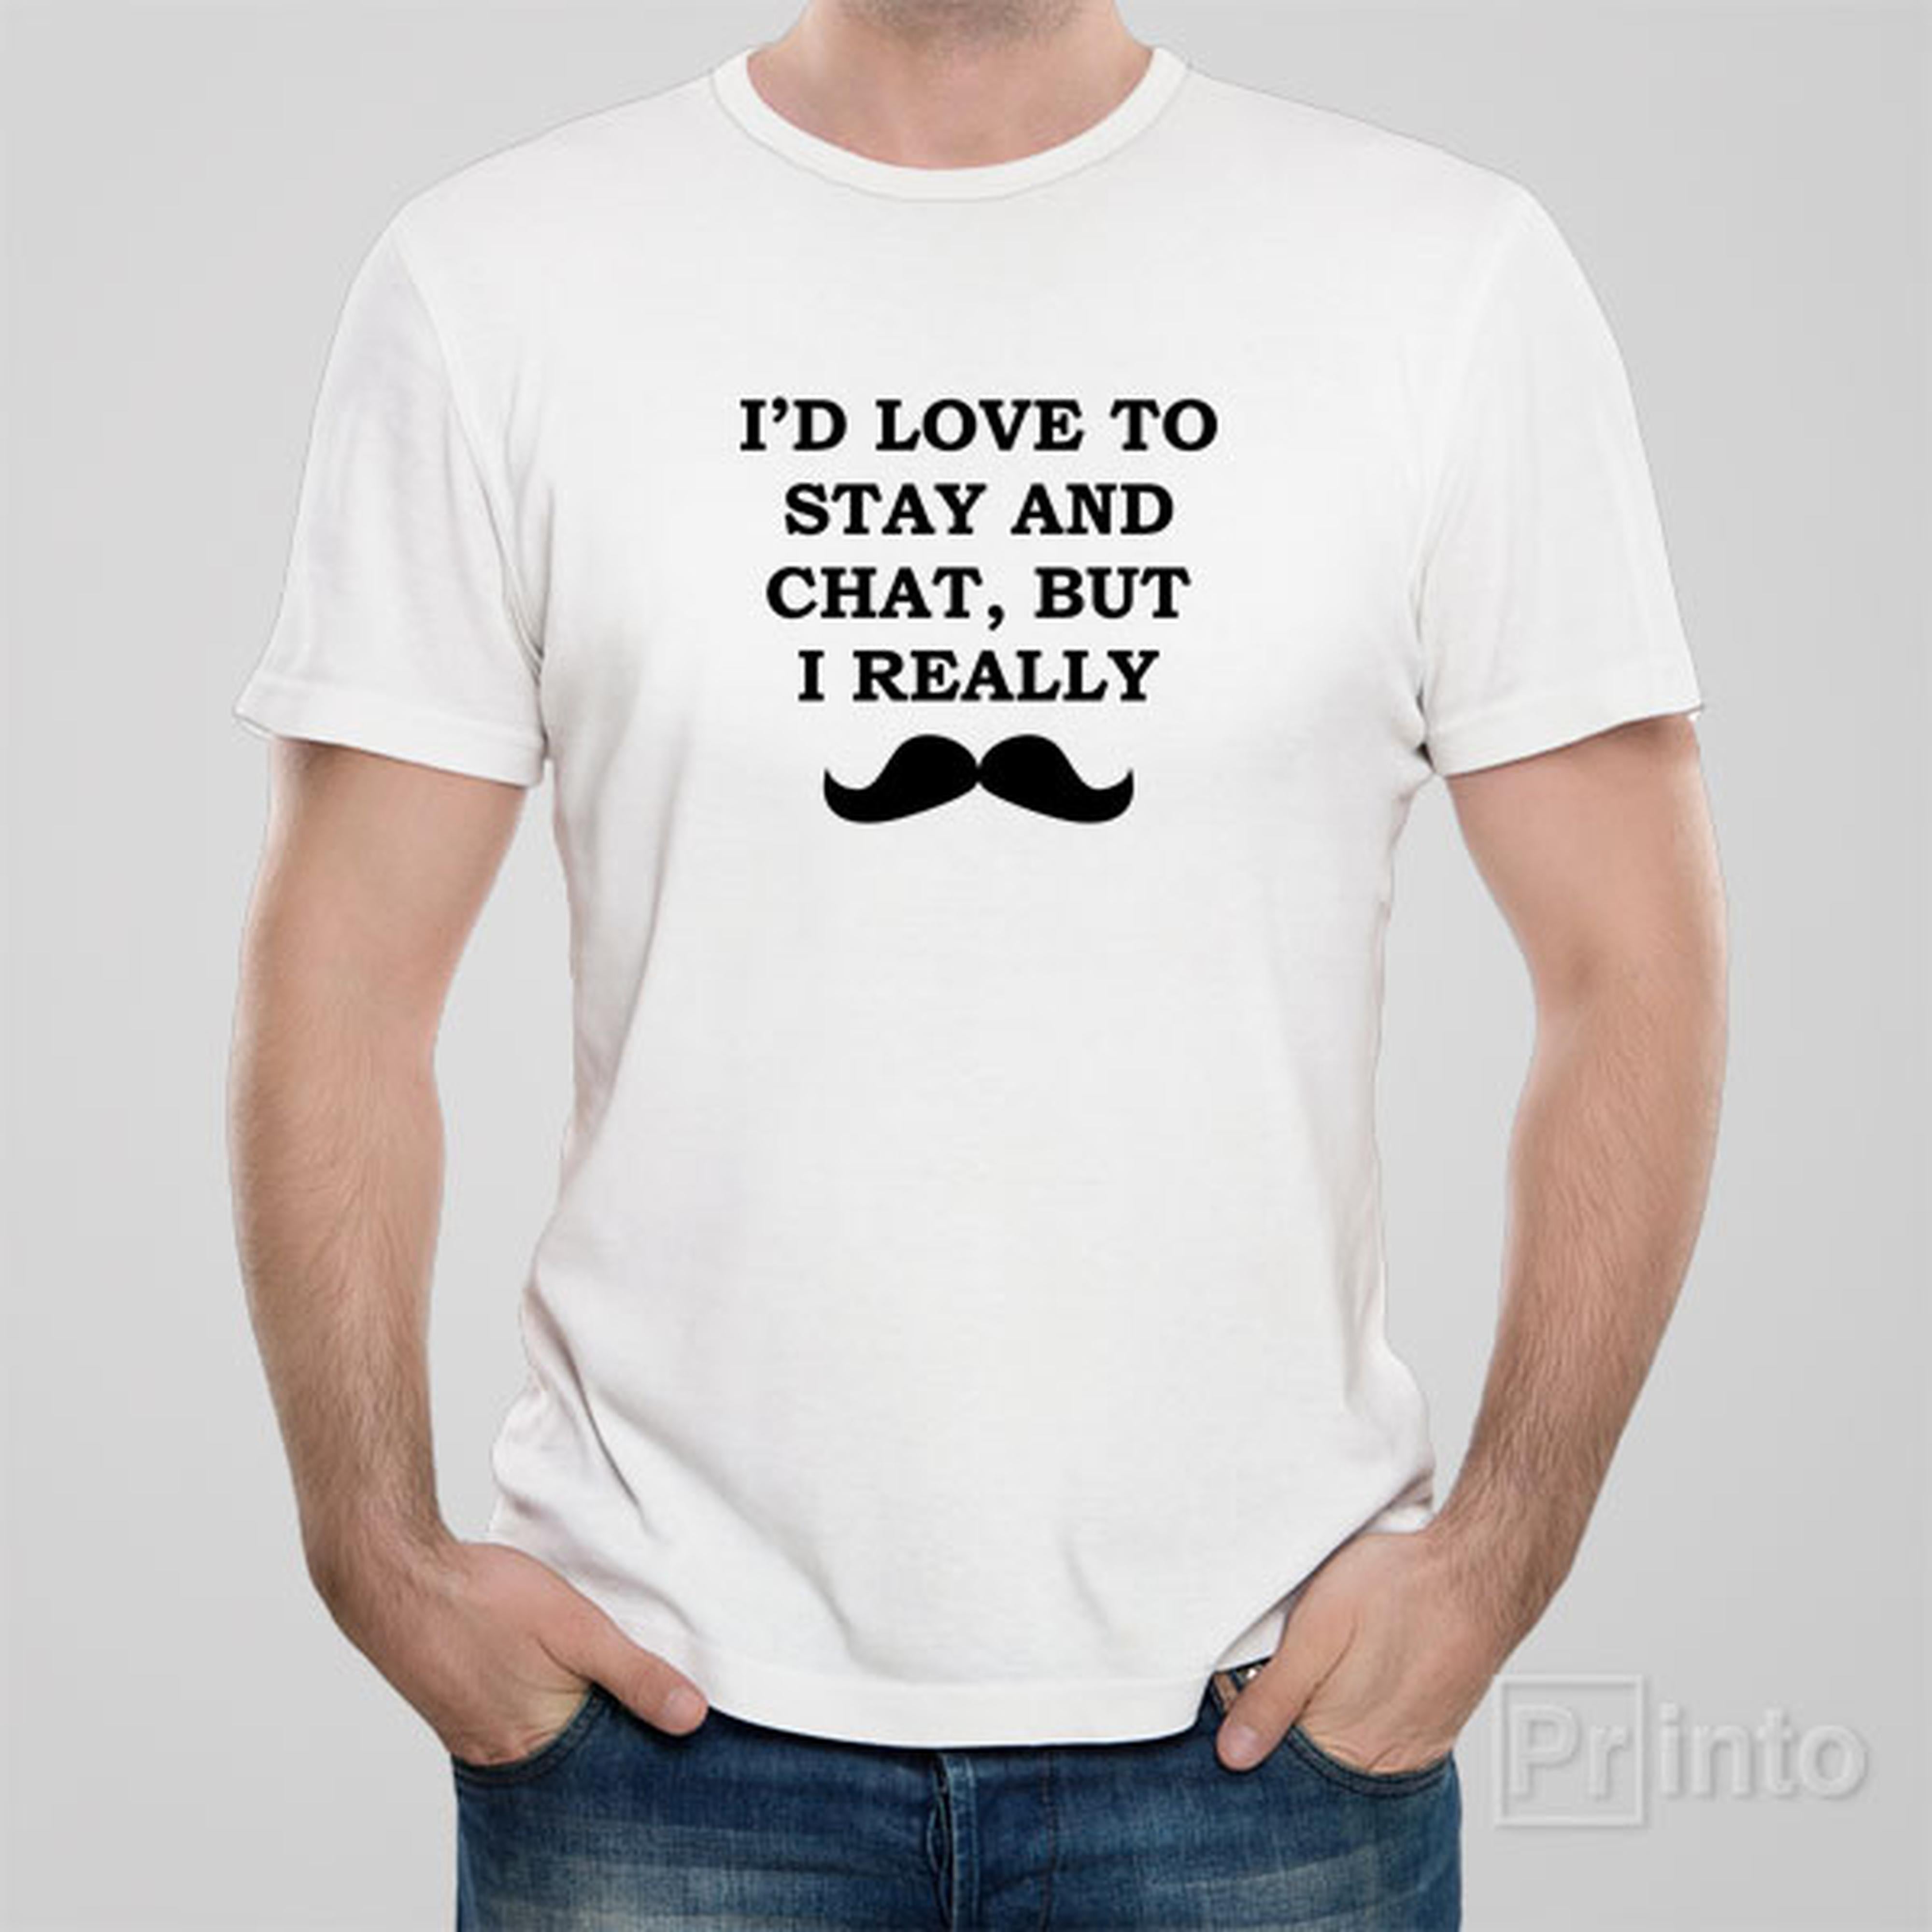 id-like-to-stay-and-chat-but-i-really-t-shirt